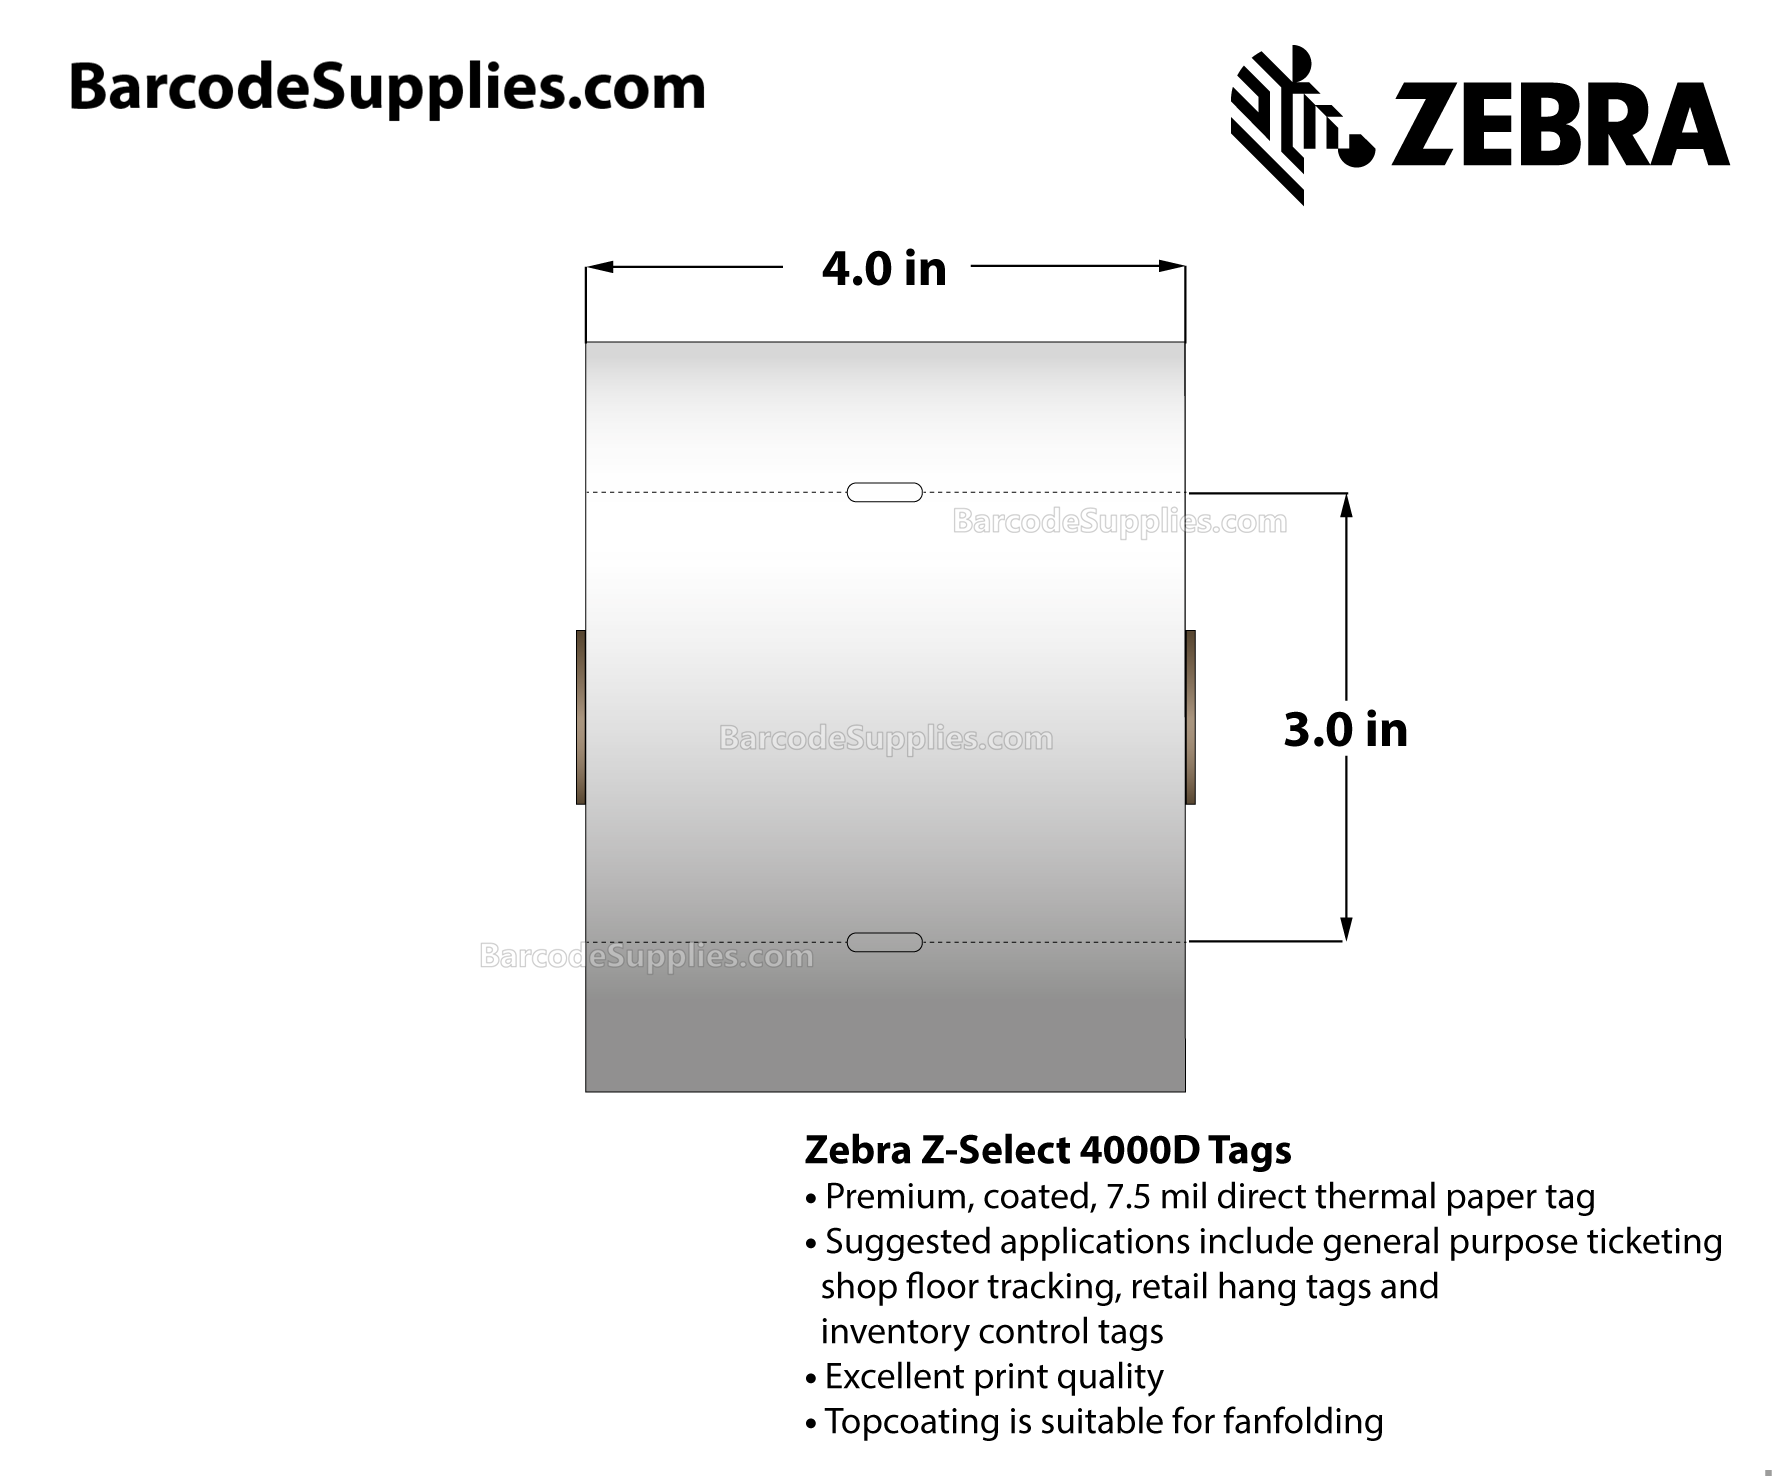 2.38 x 1 Direct Thermal Labels - 10010052